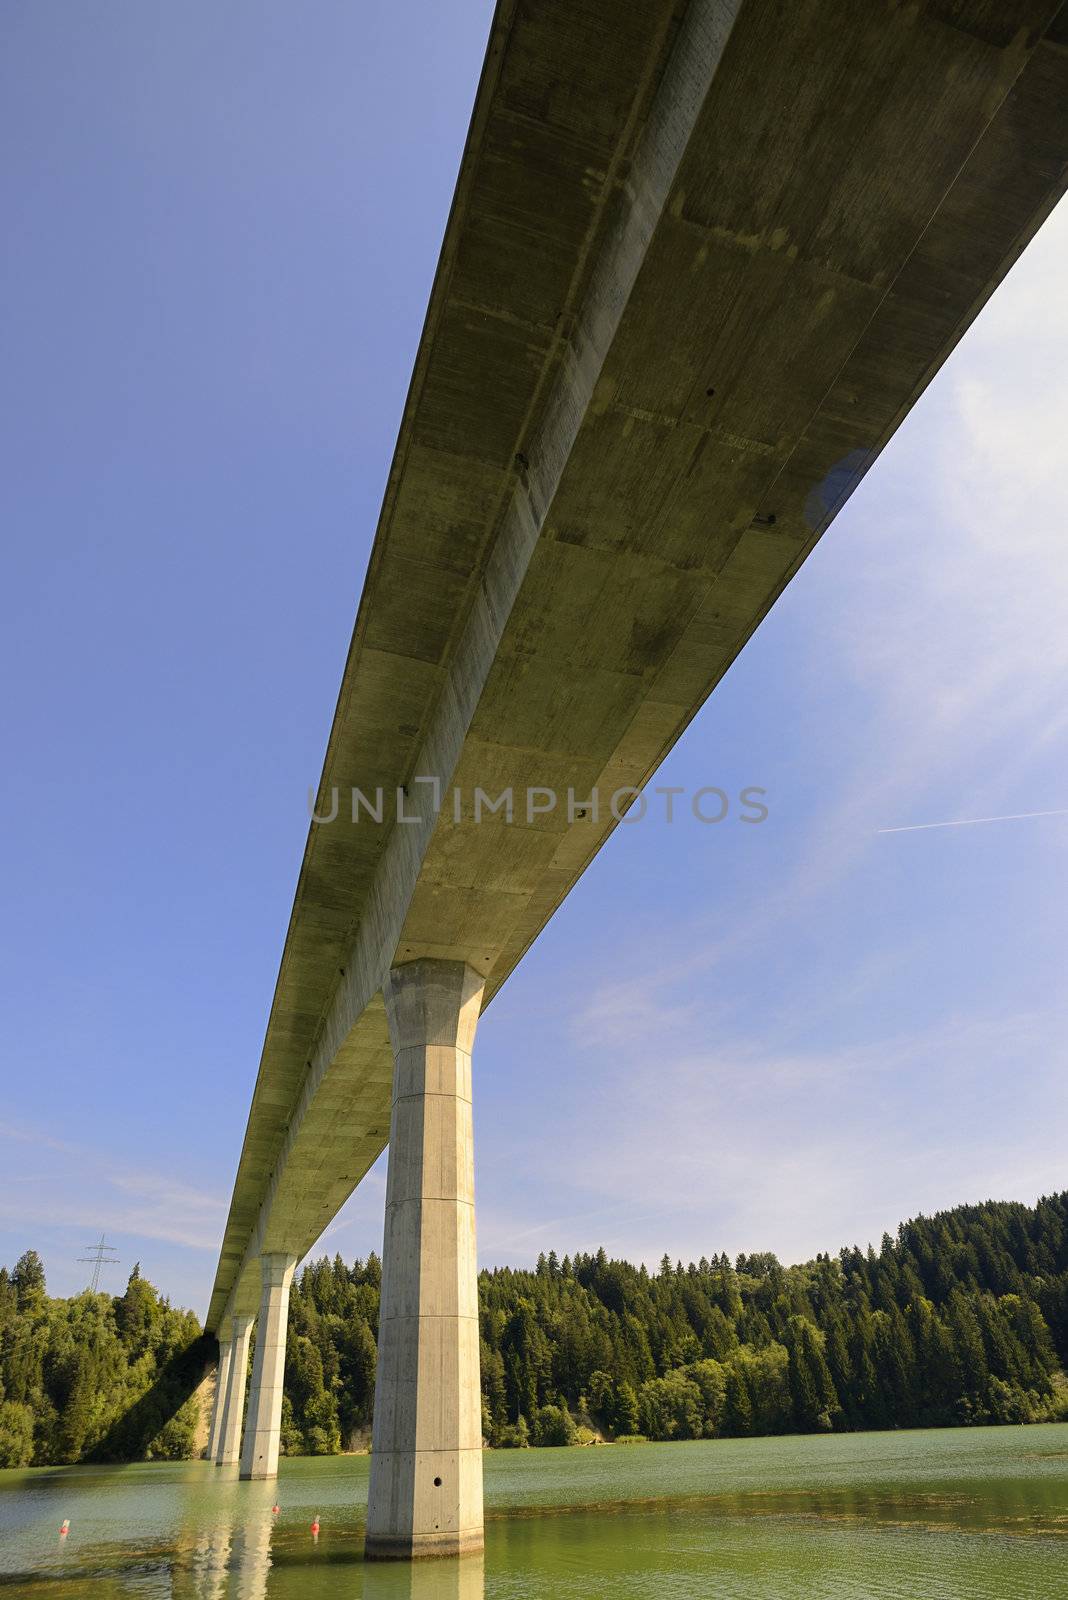 Concrete-Bridge over the river called "Lech". Bottom-up view. Placed in Germany, Bavaria, Allgäu. There are also coniferous trees and blue sky, sunny weather.